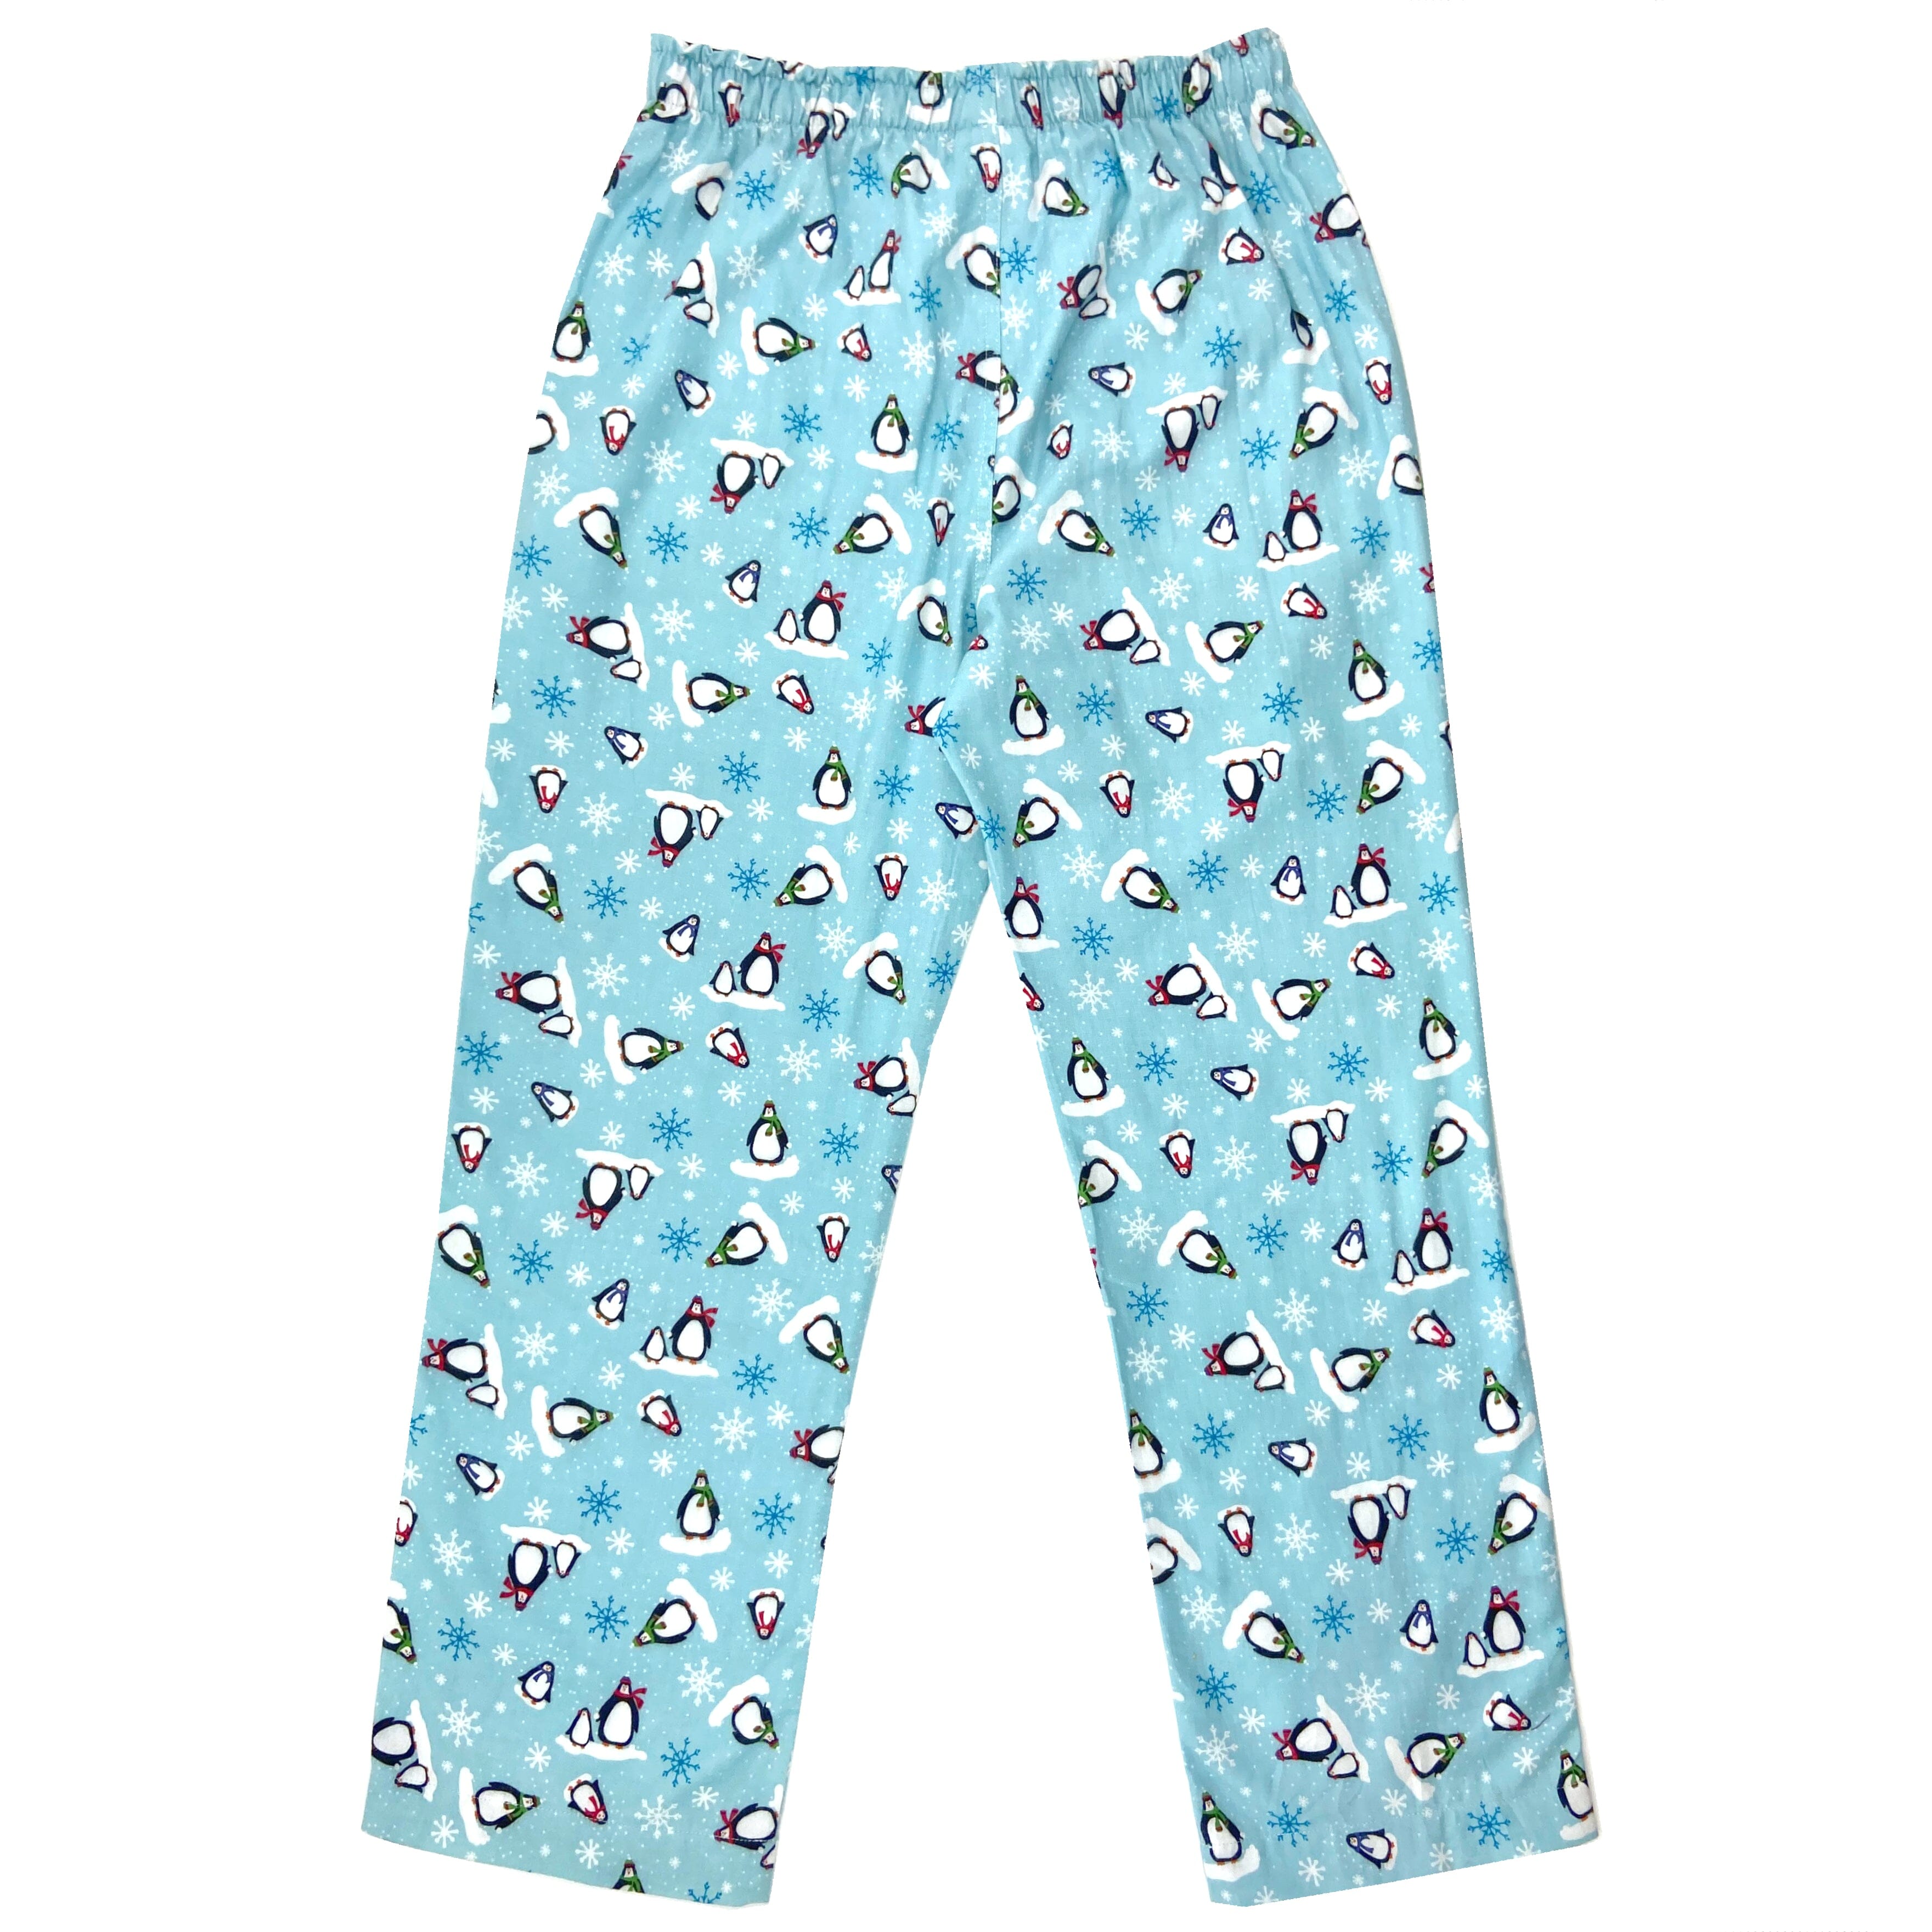 Men's Light Blue Long Pajama Pant Bottoms with Penguin All Over Print